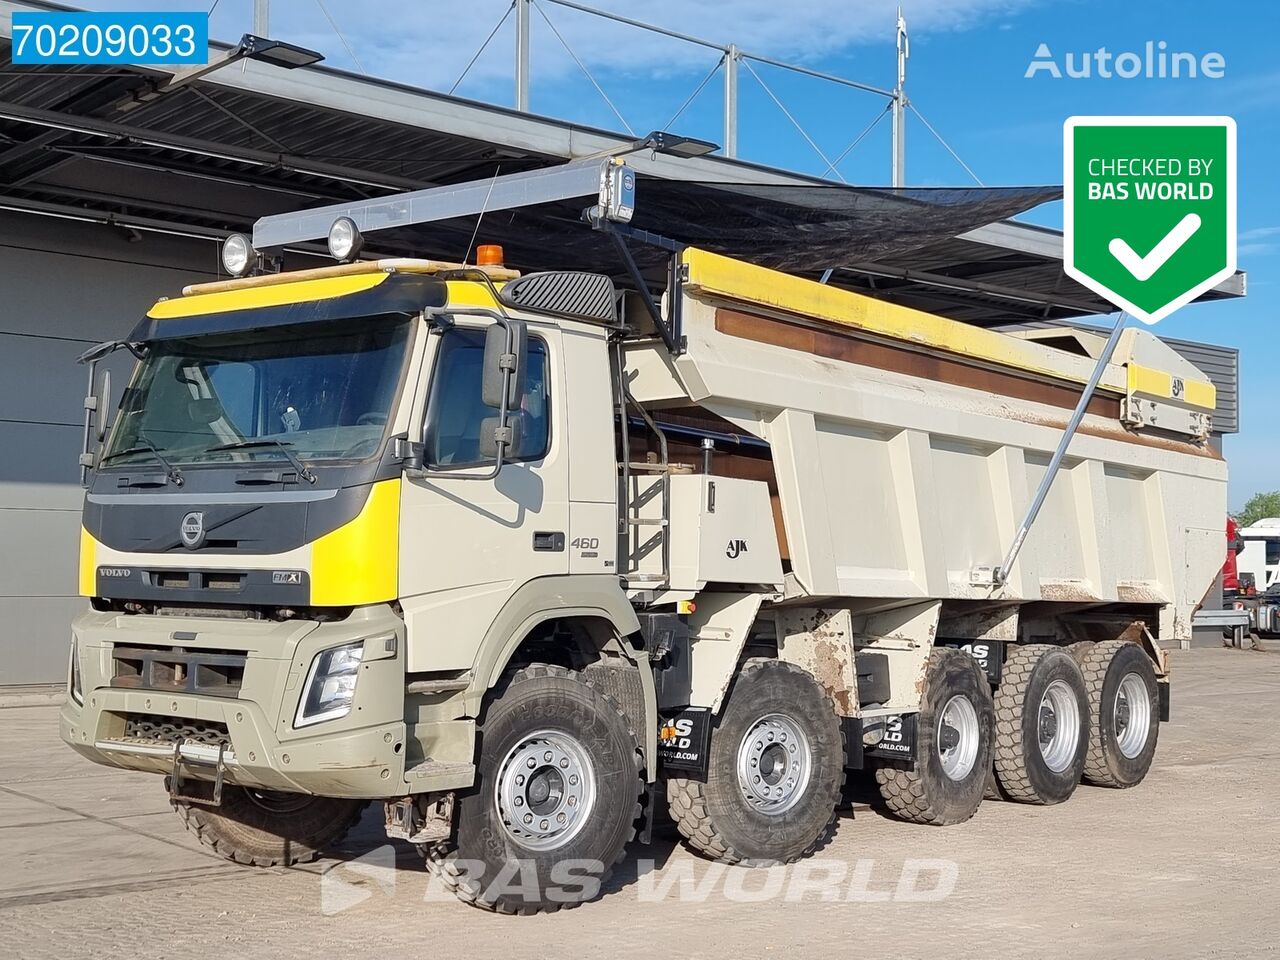 Volvo FMX 460 10X4 33m3 55T payload Hydr. Pusher Euro6 dump truck